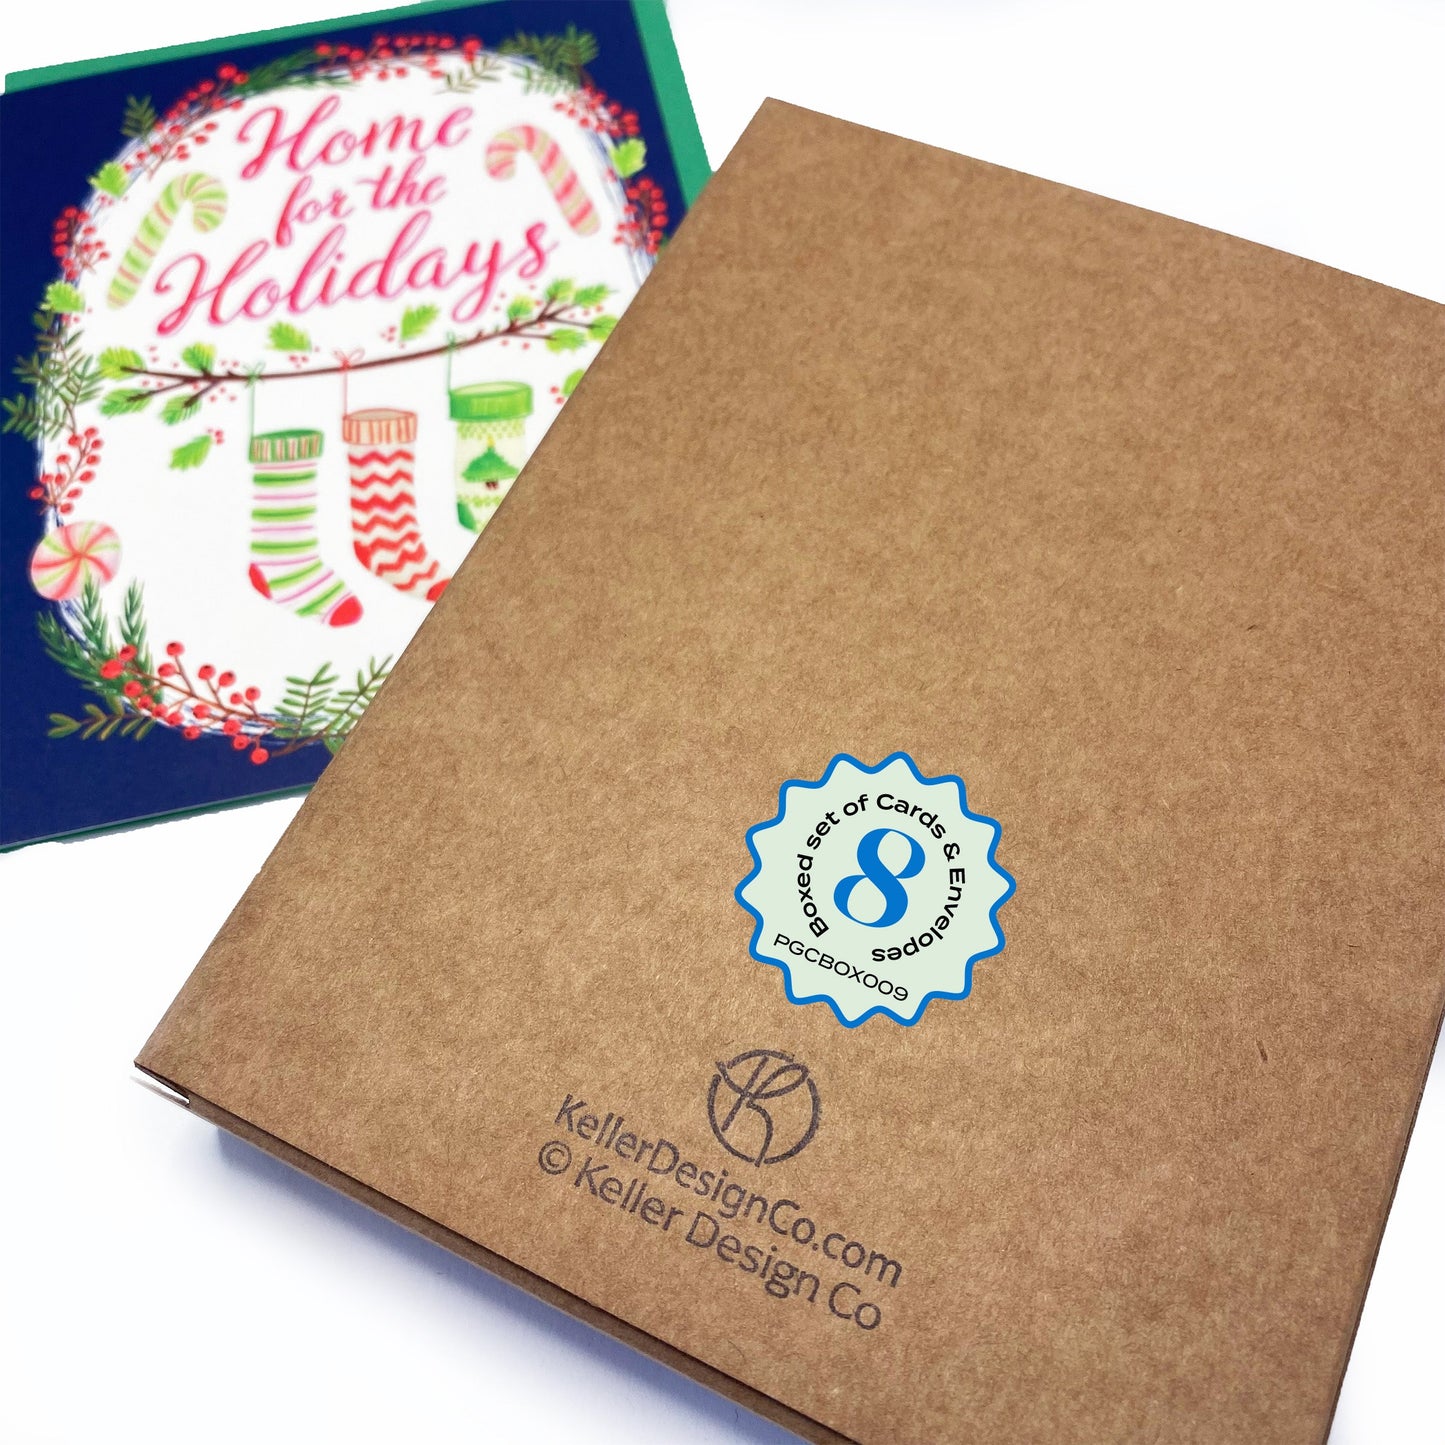 Boxed Set of 8 Cards-Home for the Holidays Greeting Cards-Wholesale